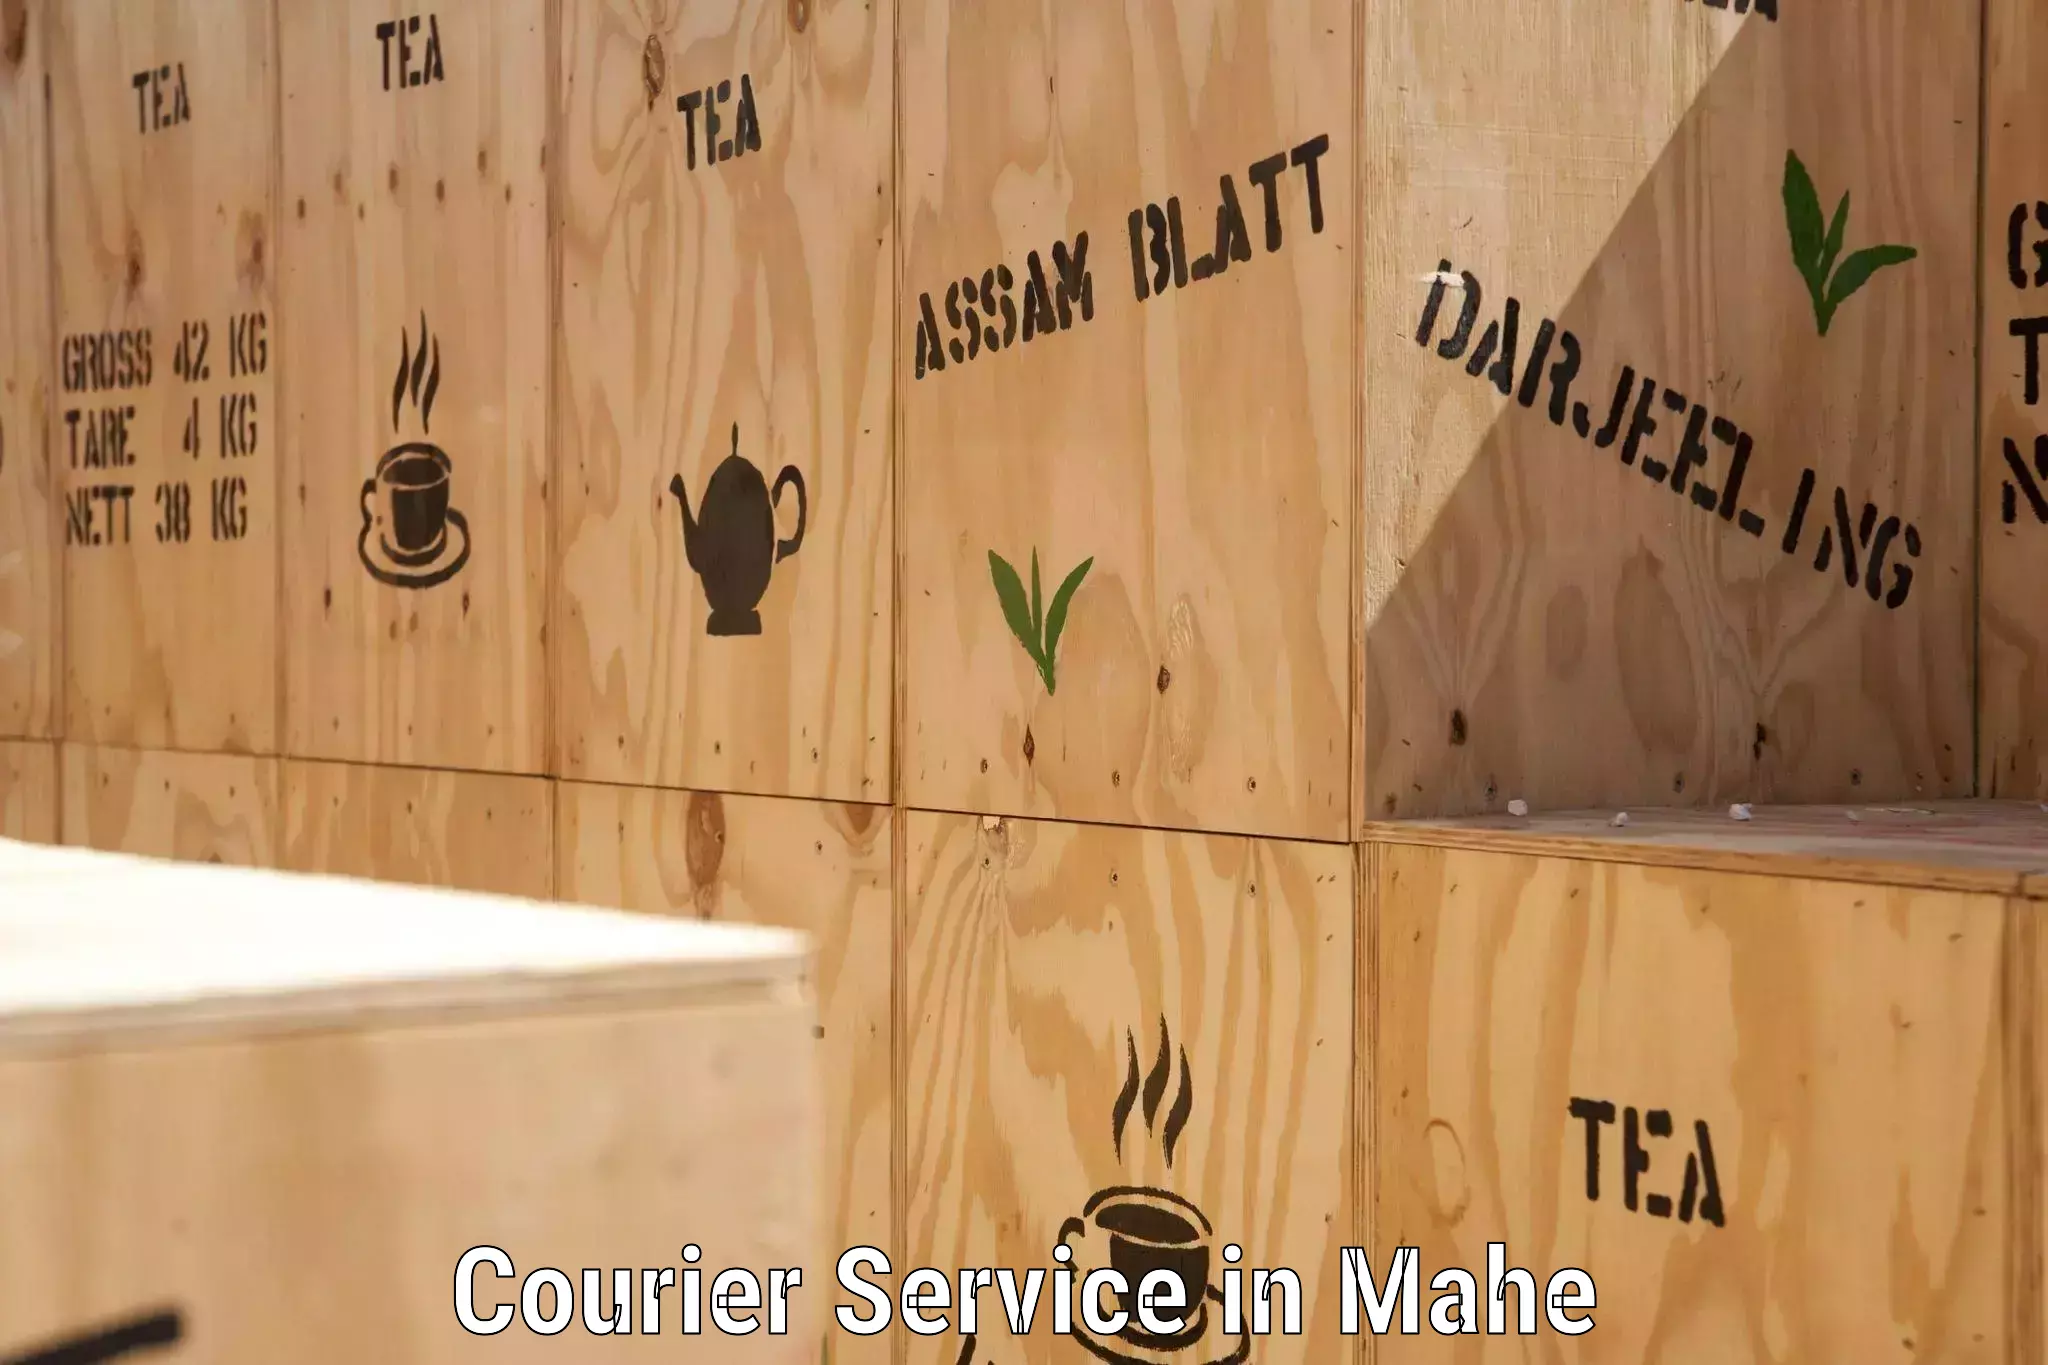 Customer-oriented courier services in Mahe